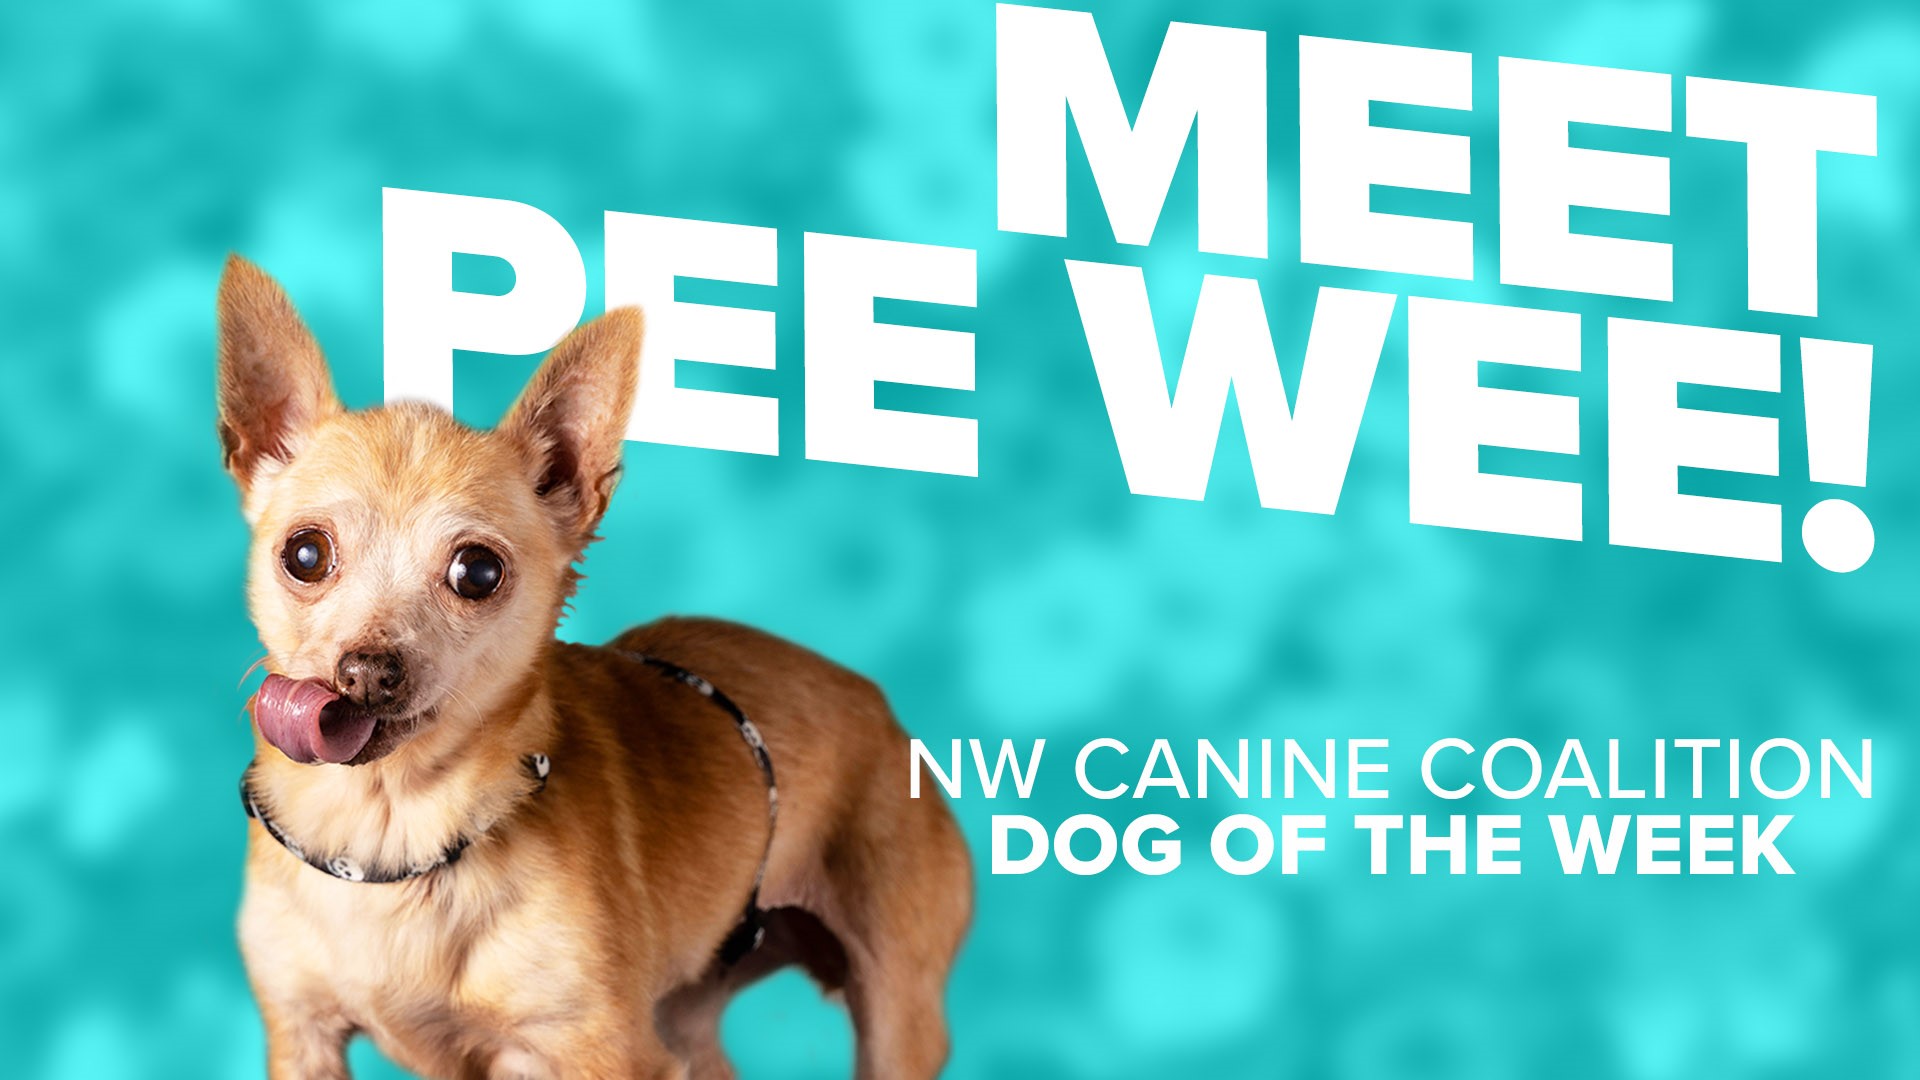 10 year old Pee Wee is looking for a forever home. If you're interested in adopting Pee Wee, call NW Canine Coalition @425-829-5712 or nwcanine.org